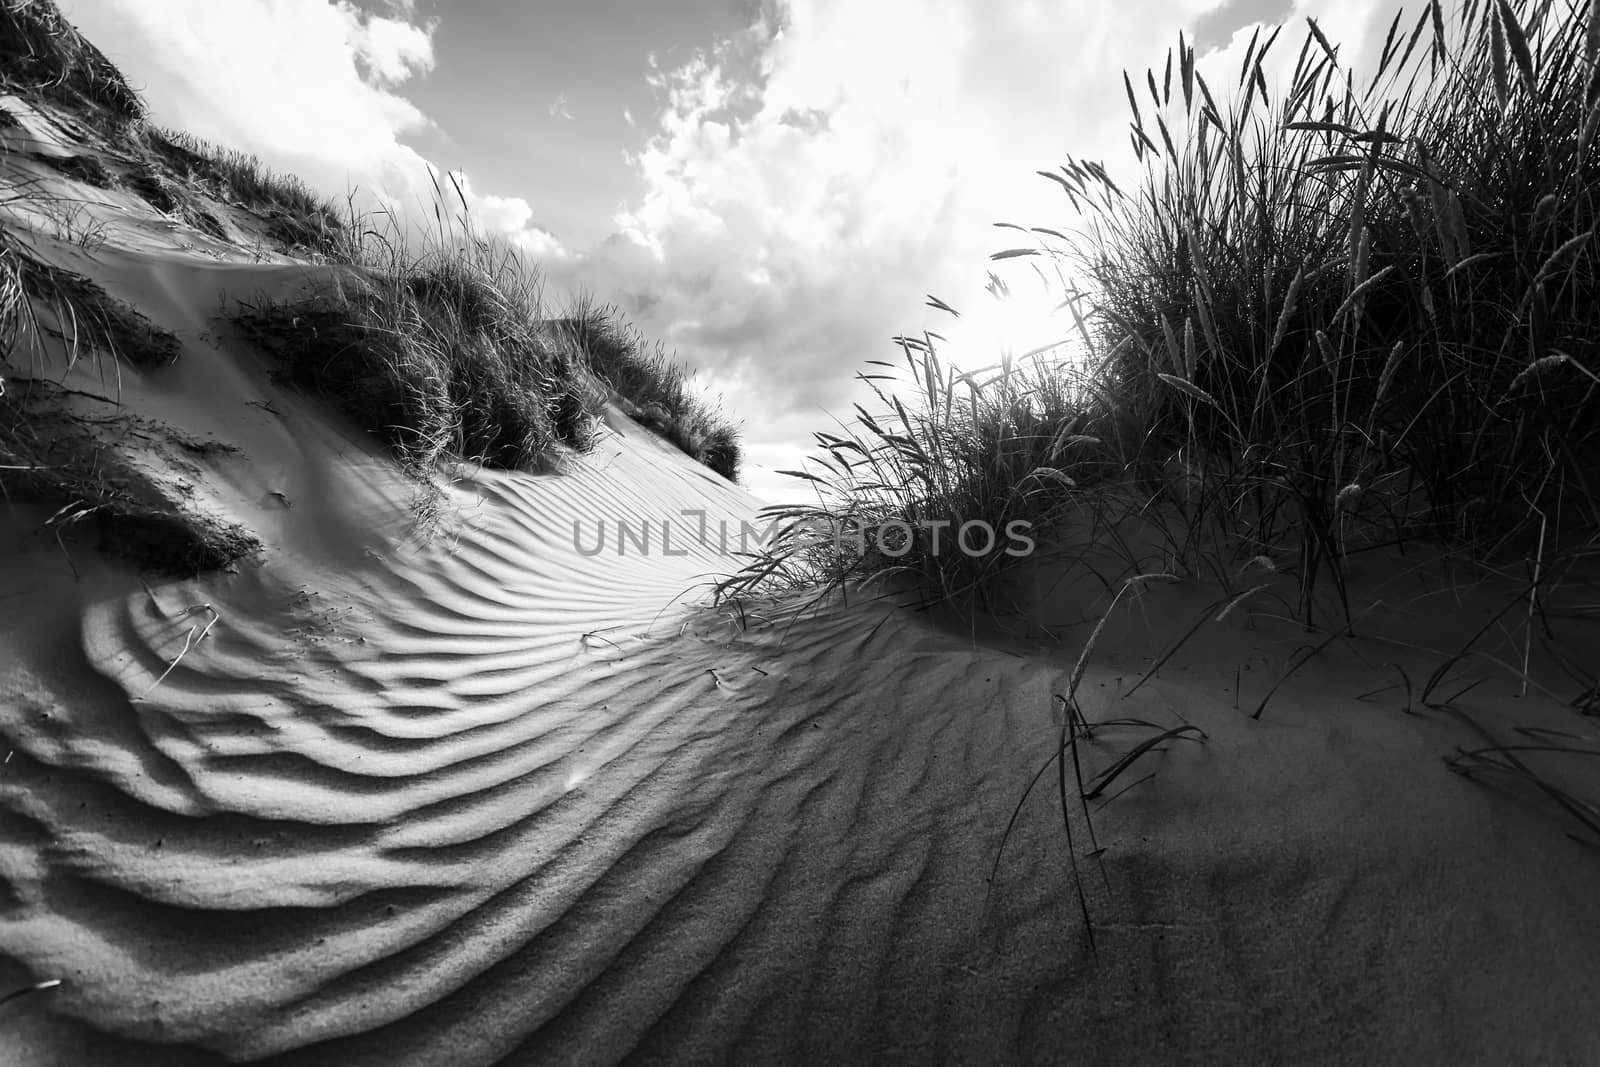 Day in the dunes by patricklienin